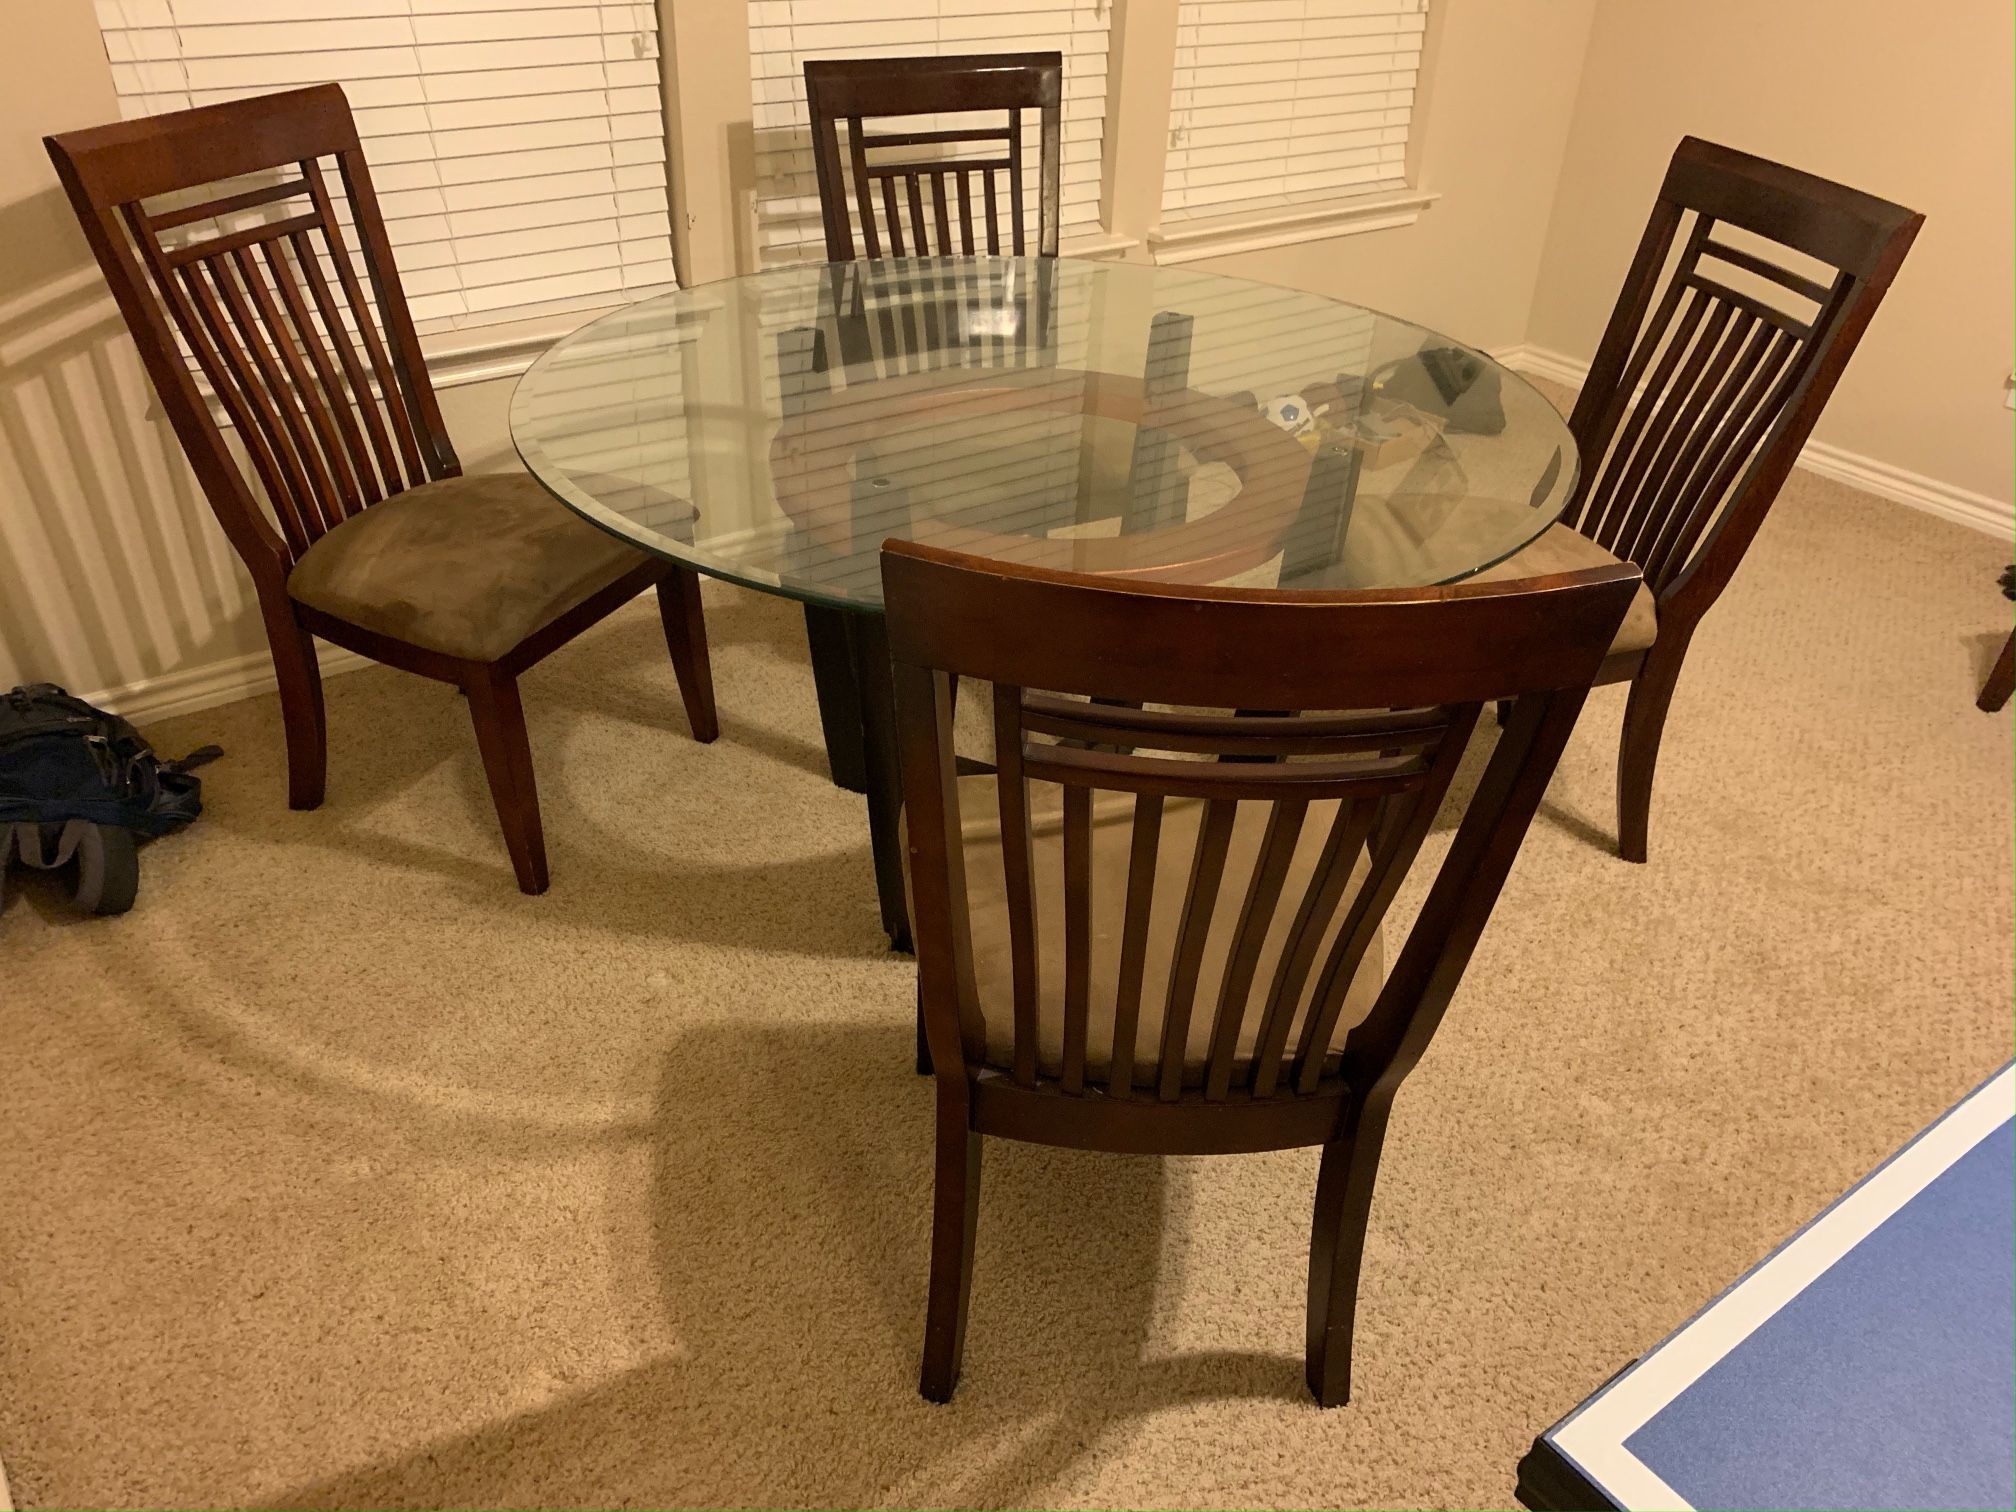 Round Glass Breakfast Table with Chairs